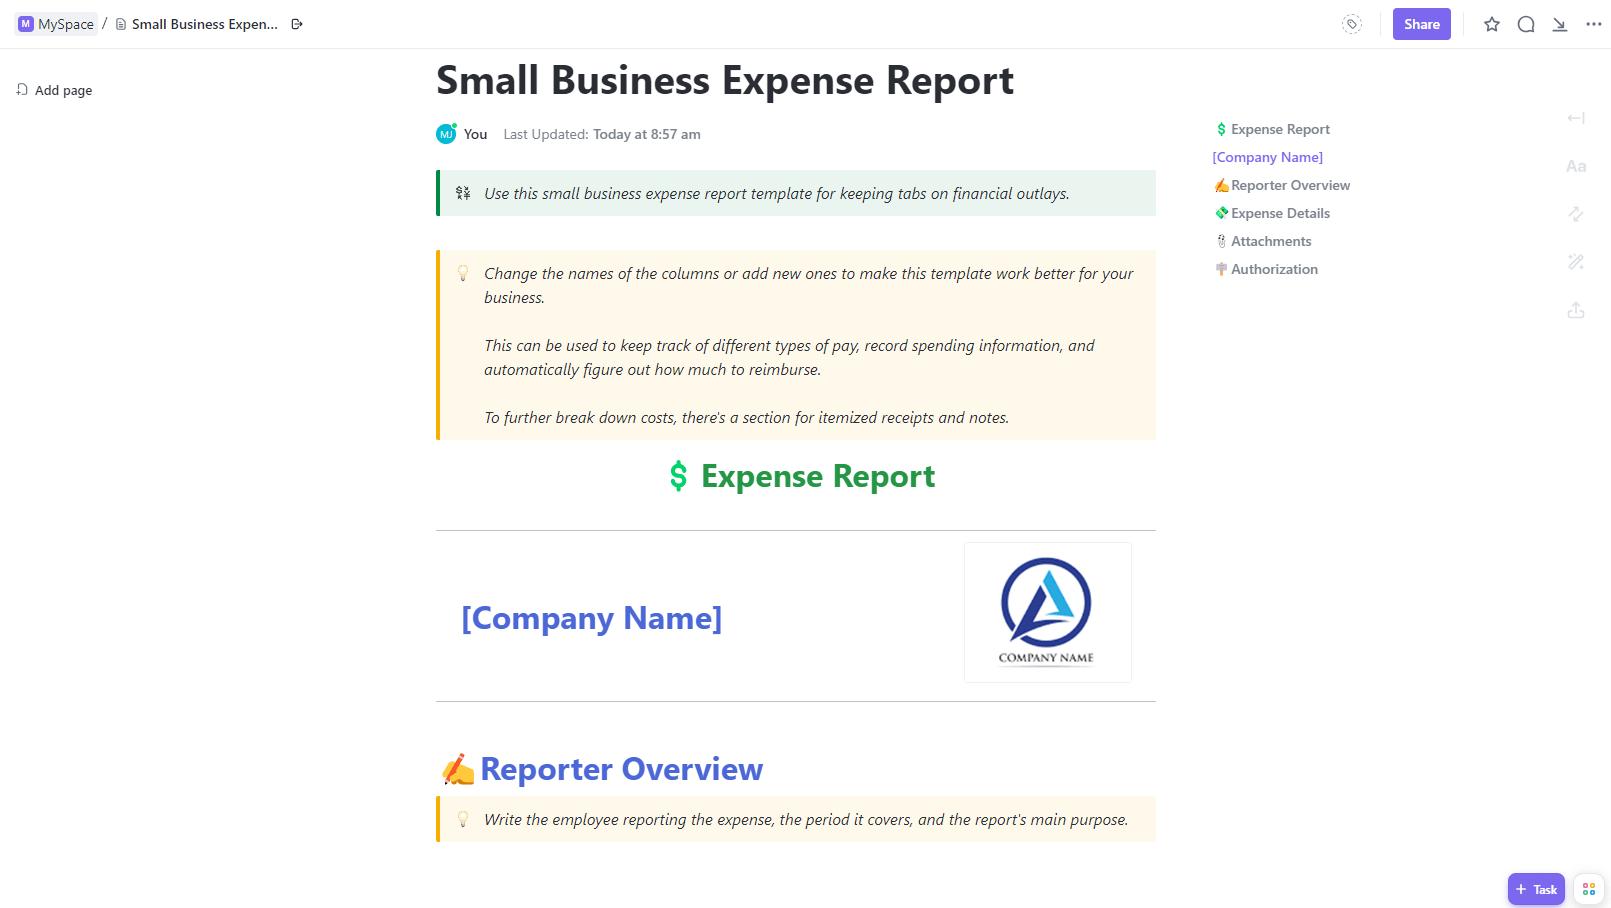 Small Business Expense Report Template by ClickUp